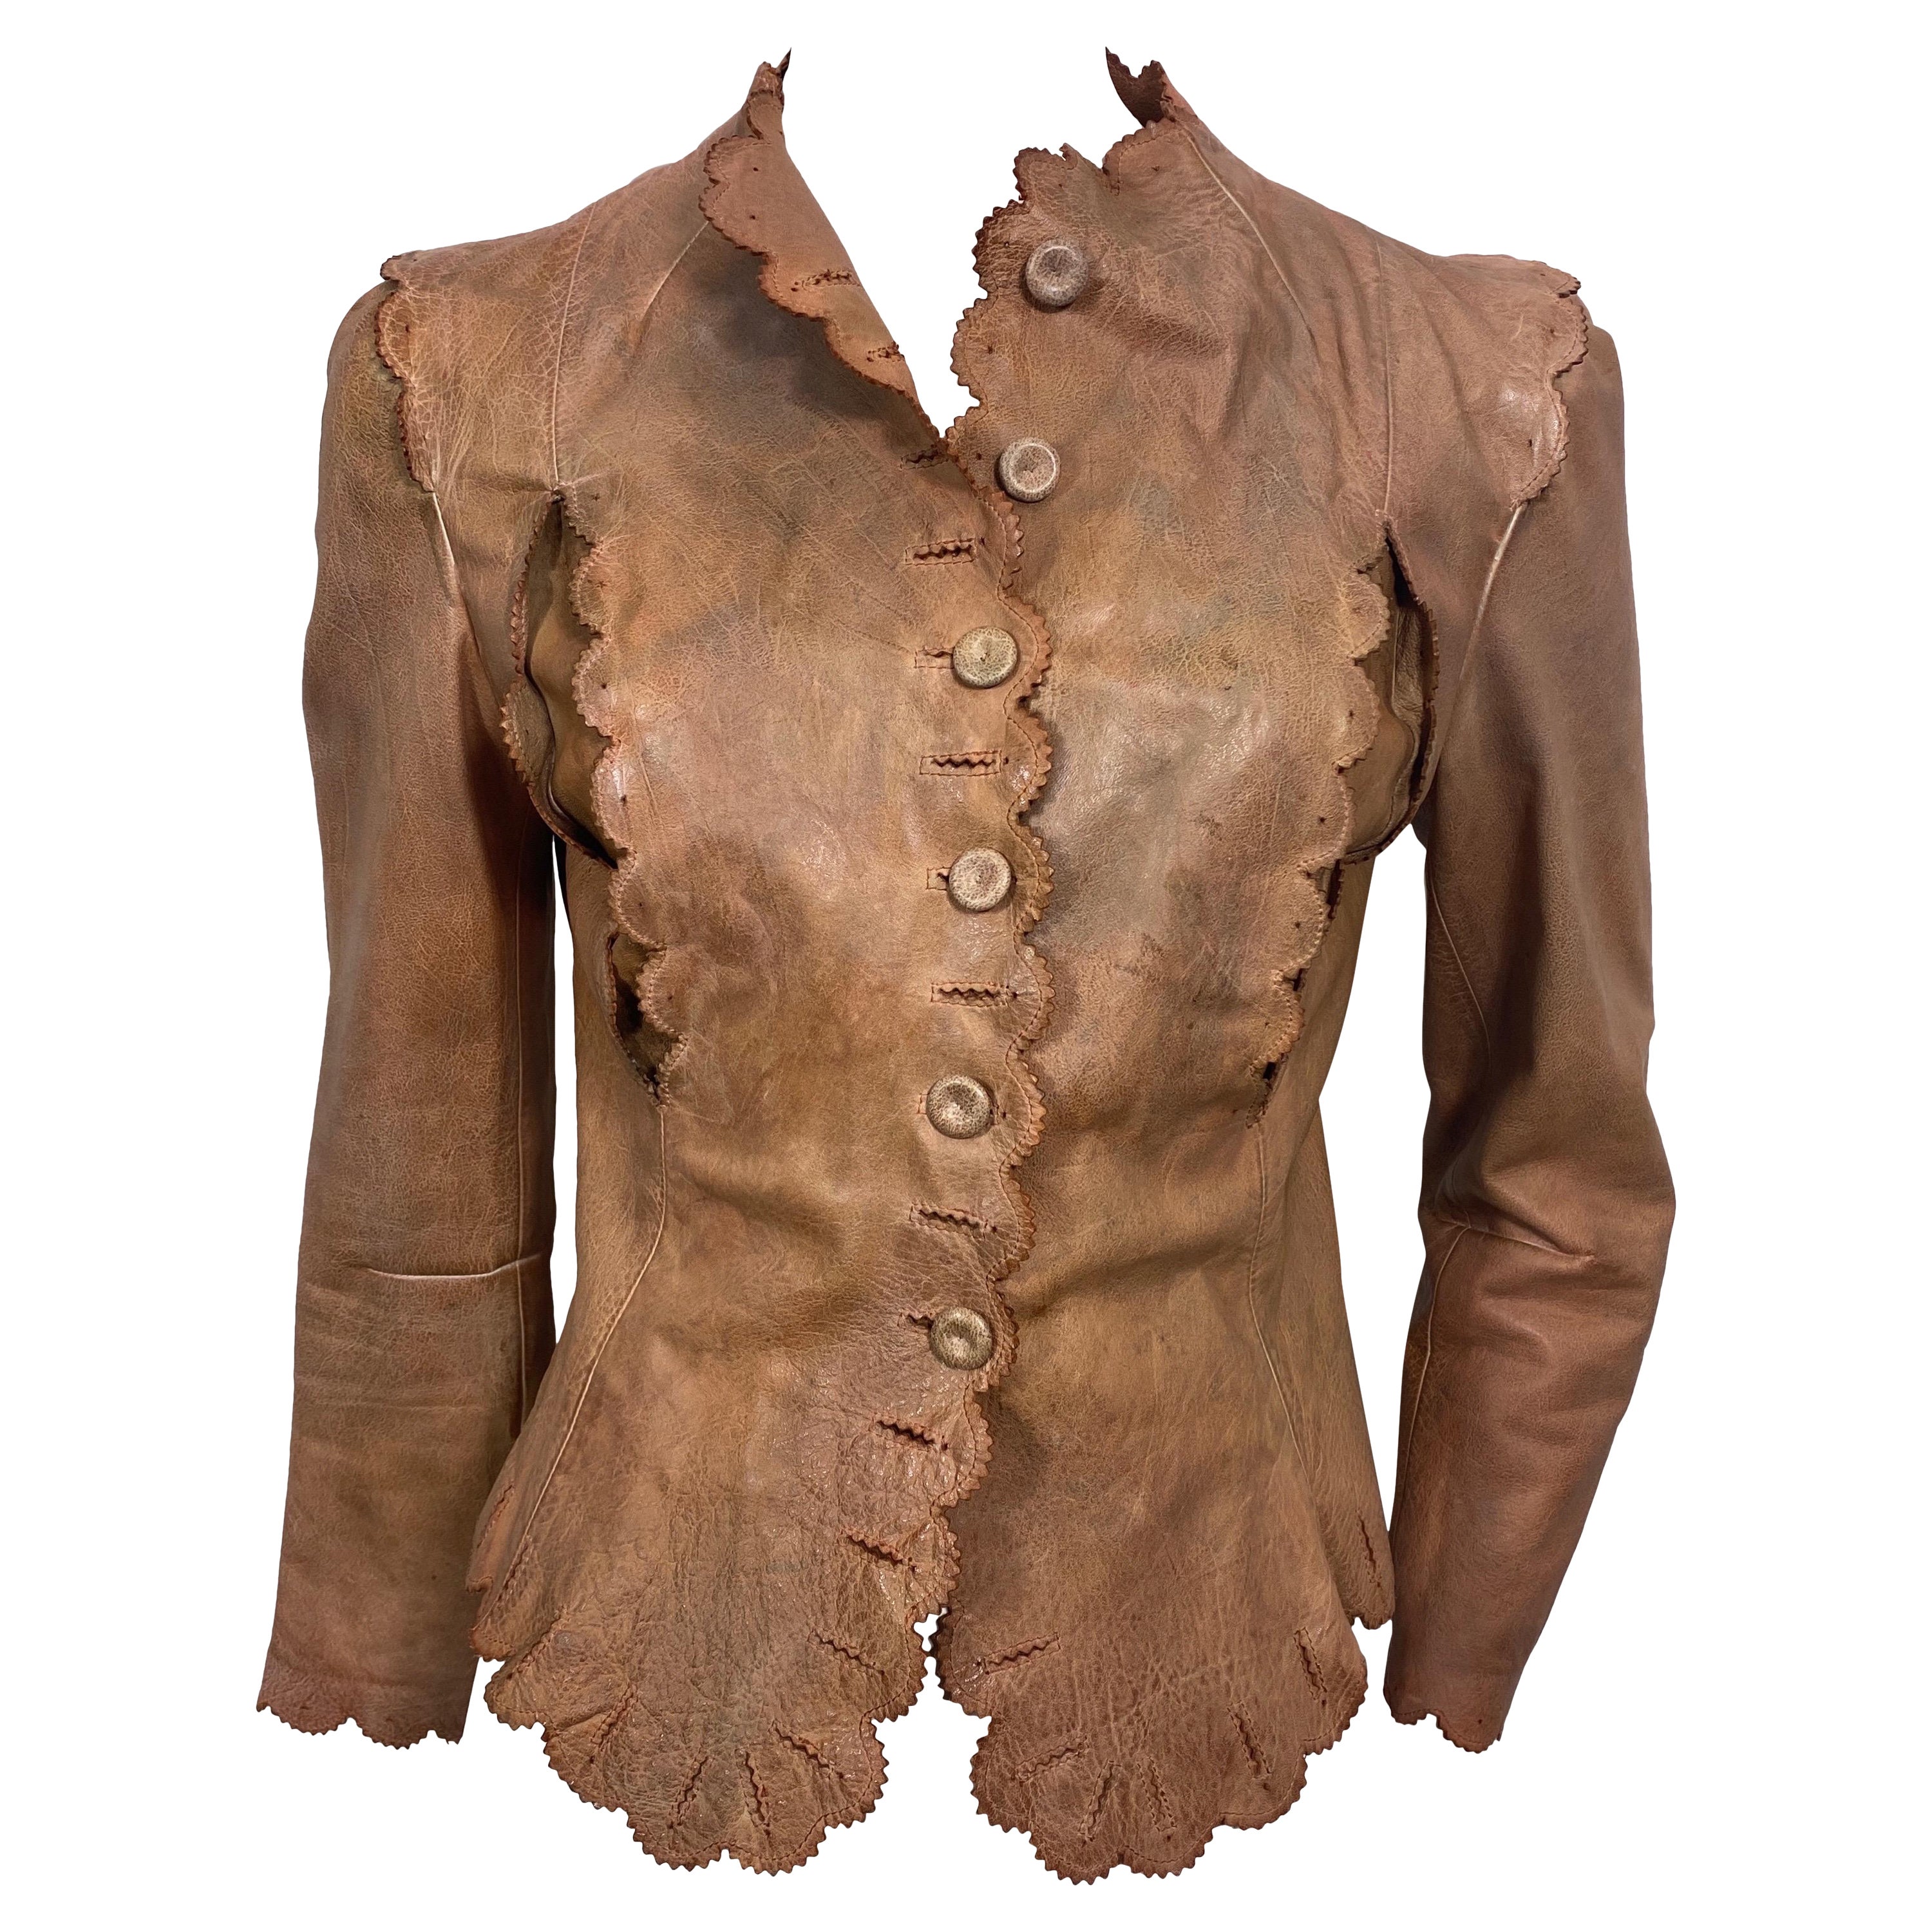 Alexander McQueen Dark Nude Distressed Leather Jacket-Size 40 For Sale